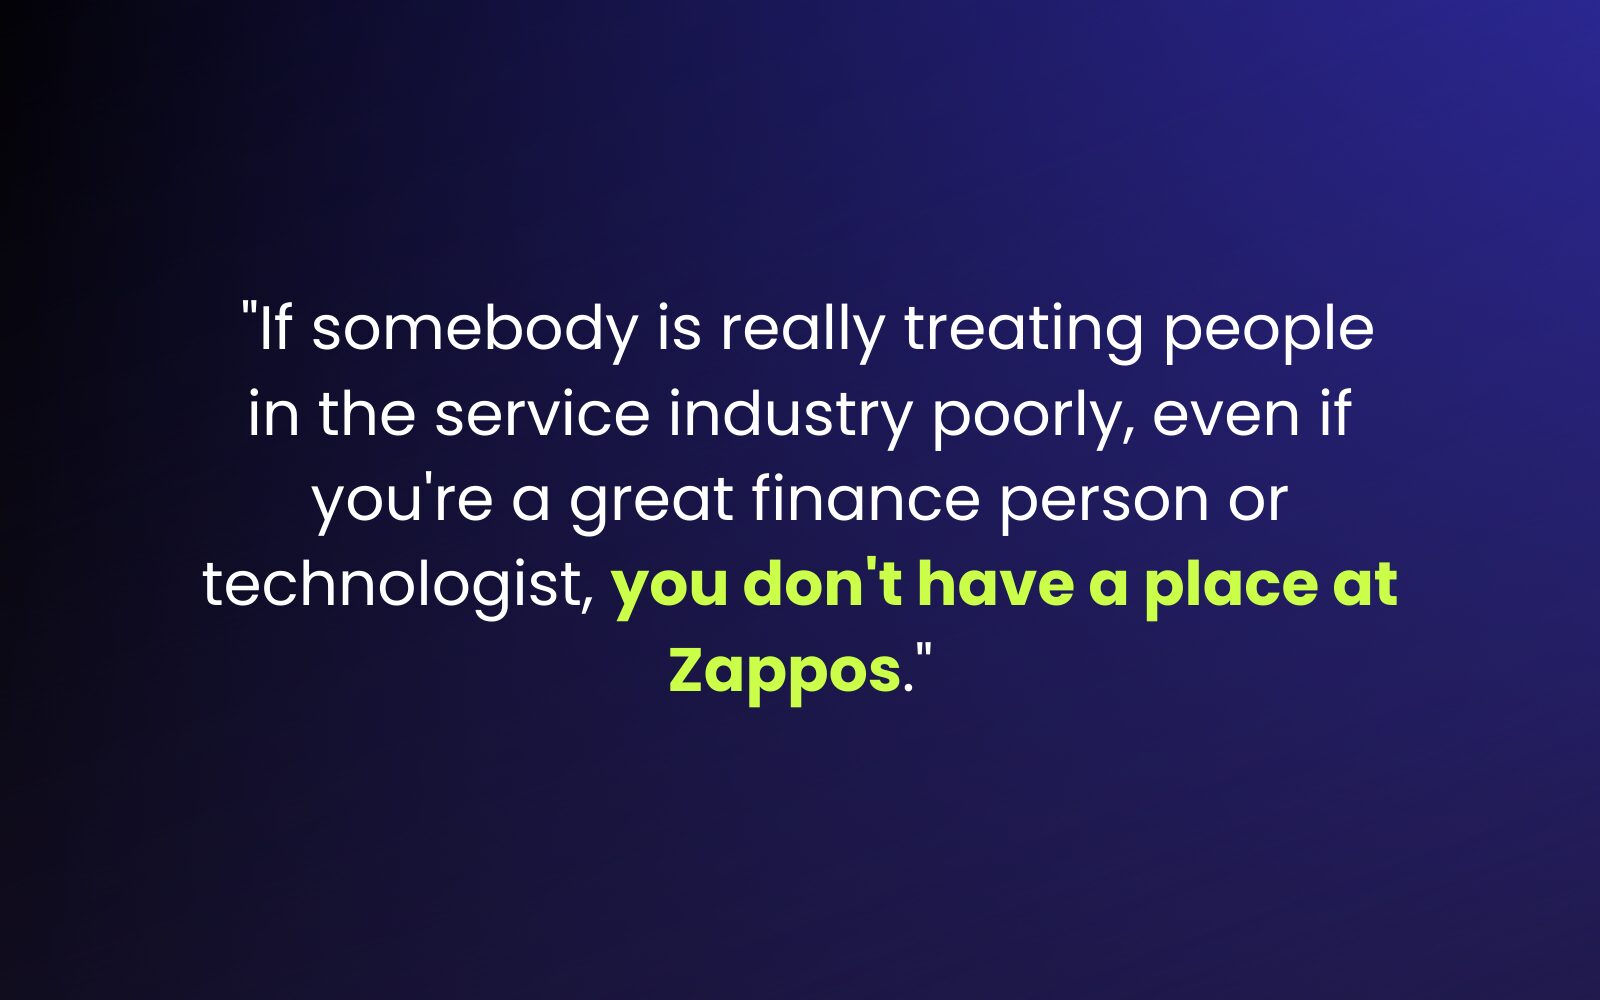 "If somebody is really treating people in the service industry poorly, even if you're a great finance person or technologist, you don't have a place at Zappos." How to Build Brand Loyalty